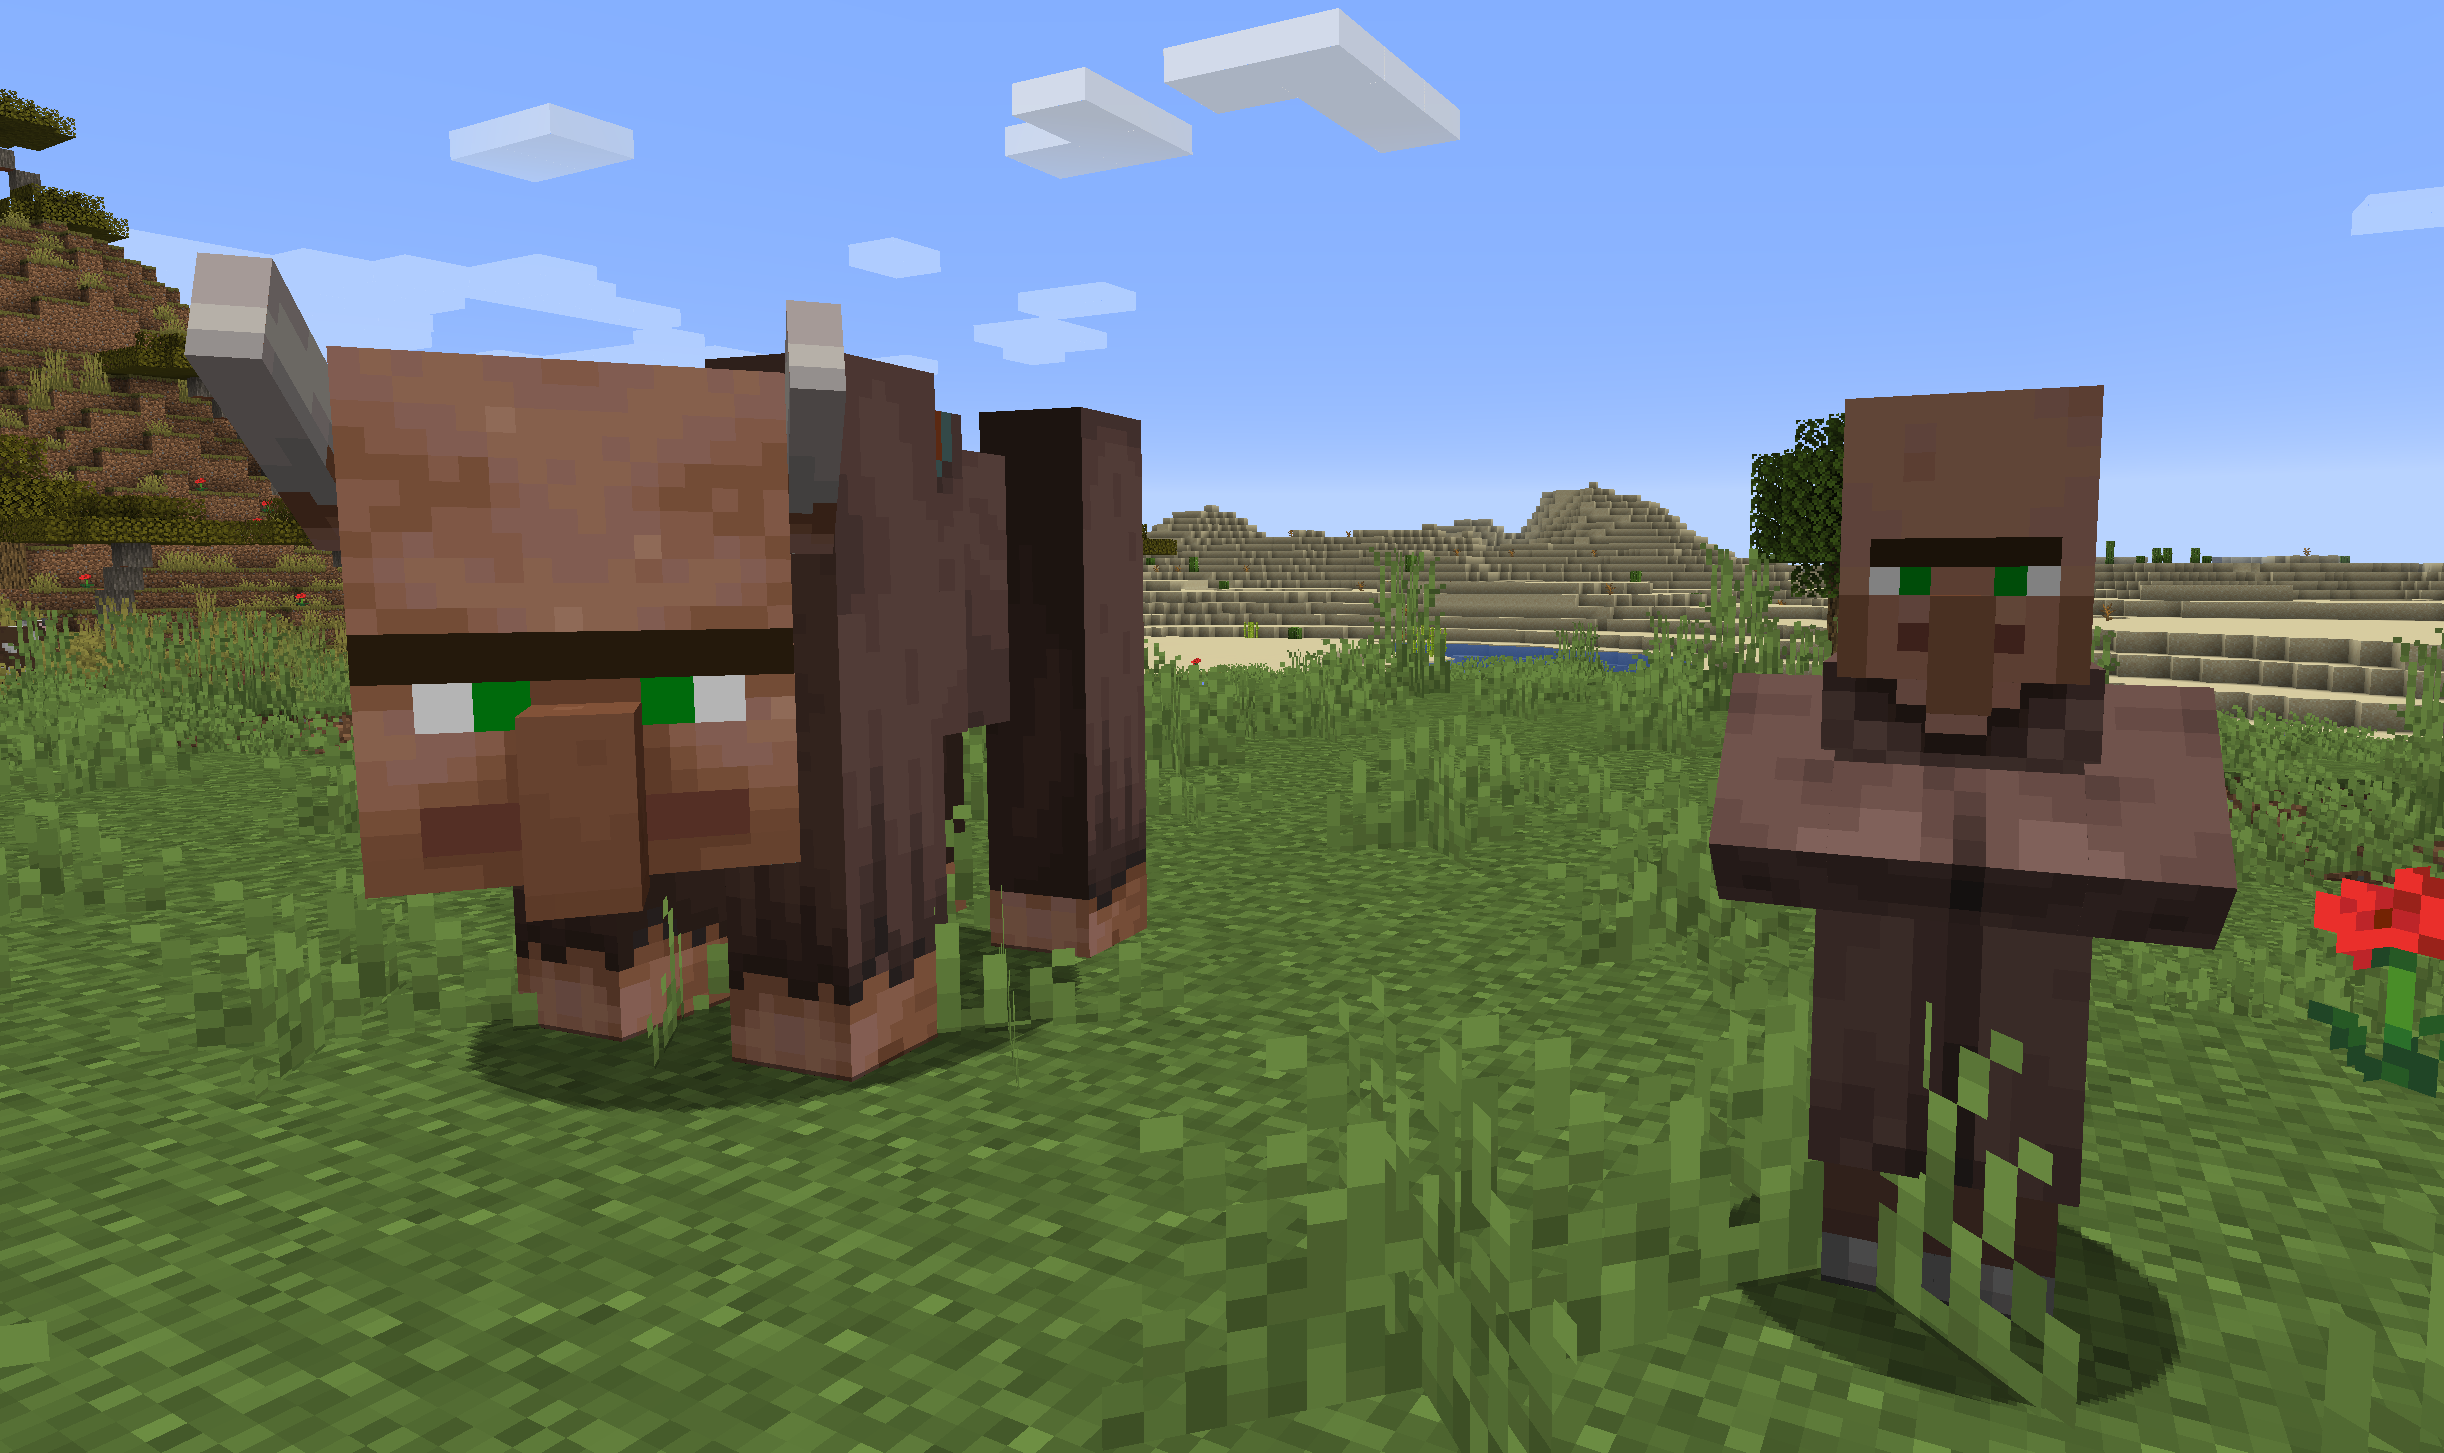 A Villager and a bigger one